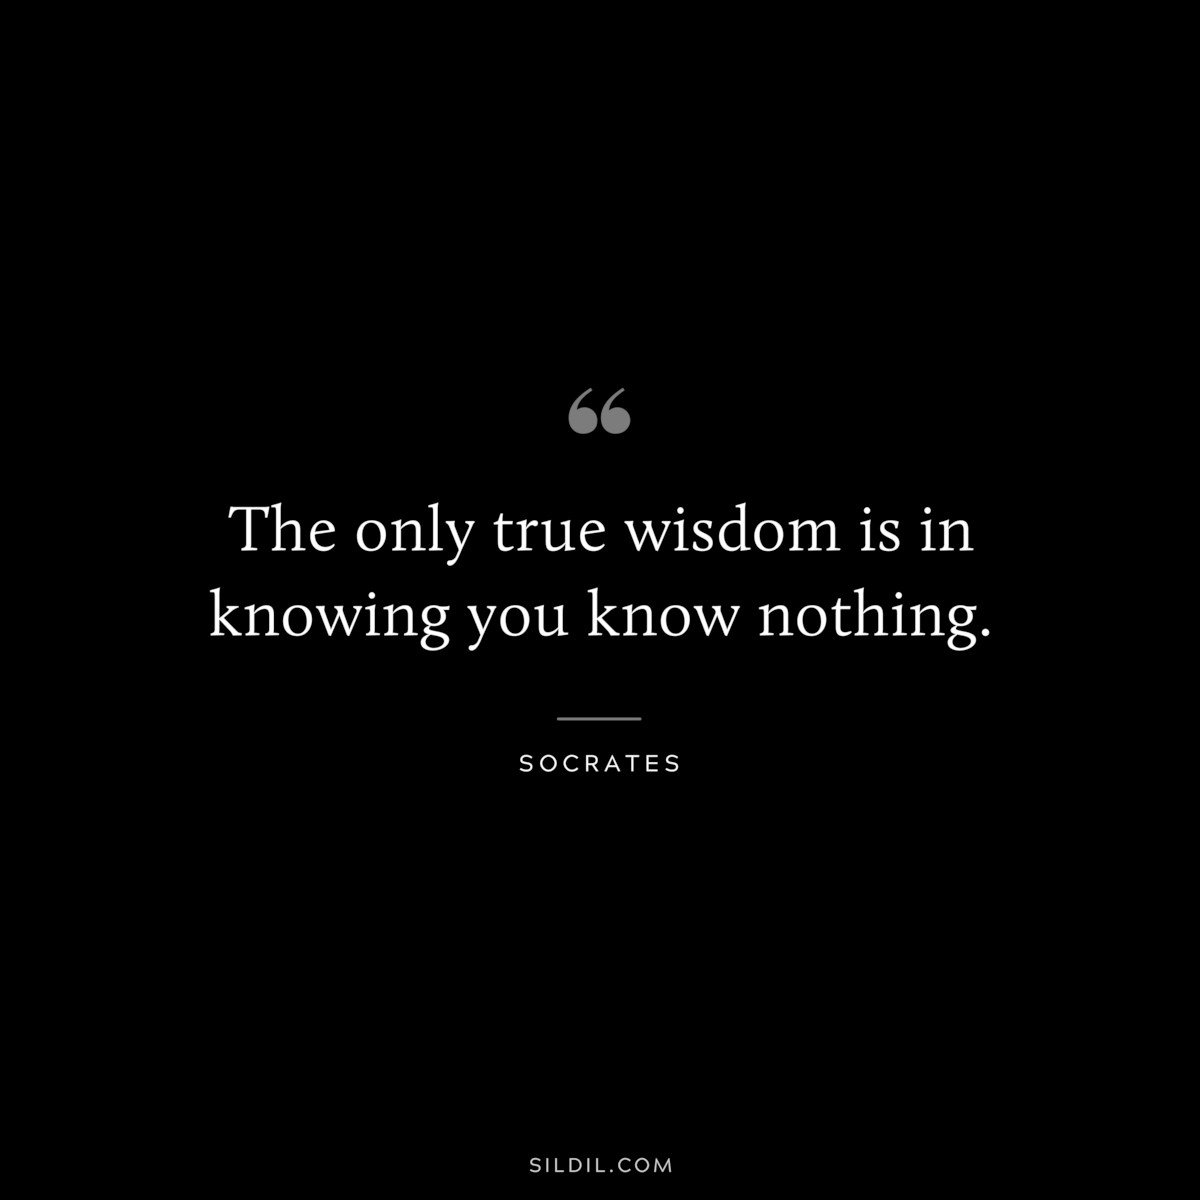 The only true wisdom is in knowing you know nothing. ― Socrates